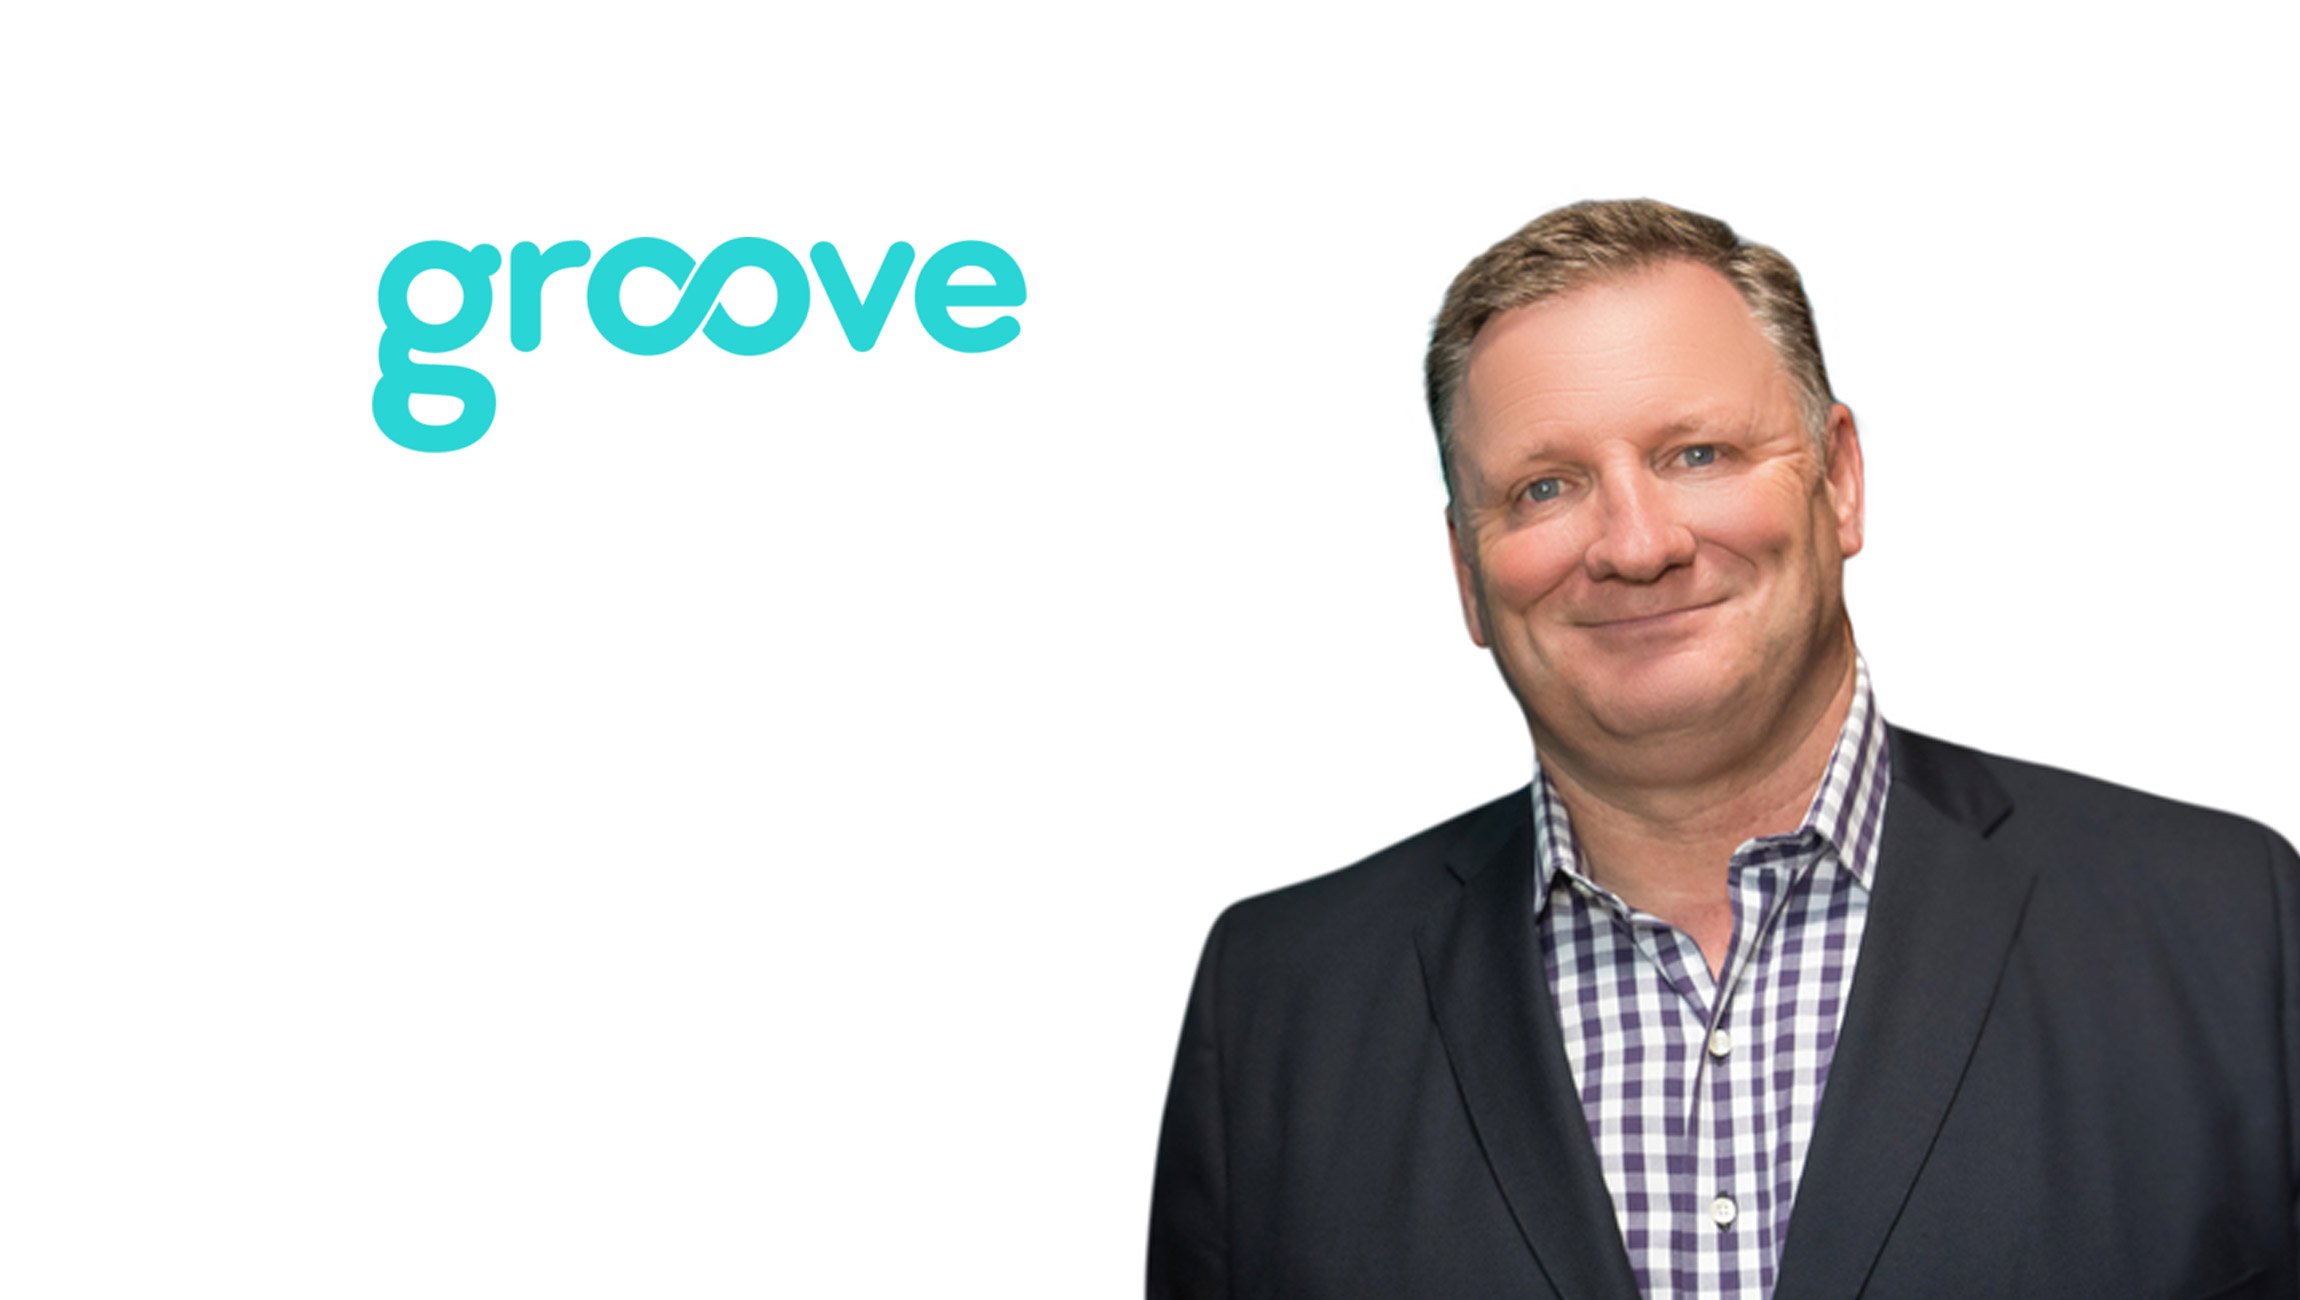 Groove Hires Mike Guerchon as SVP of People